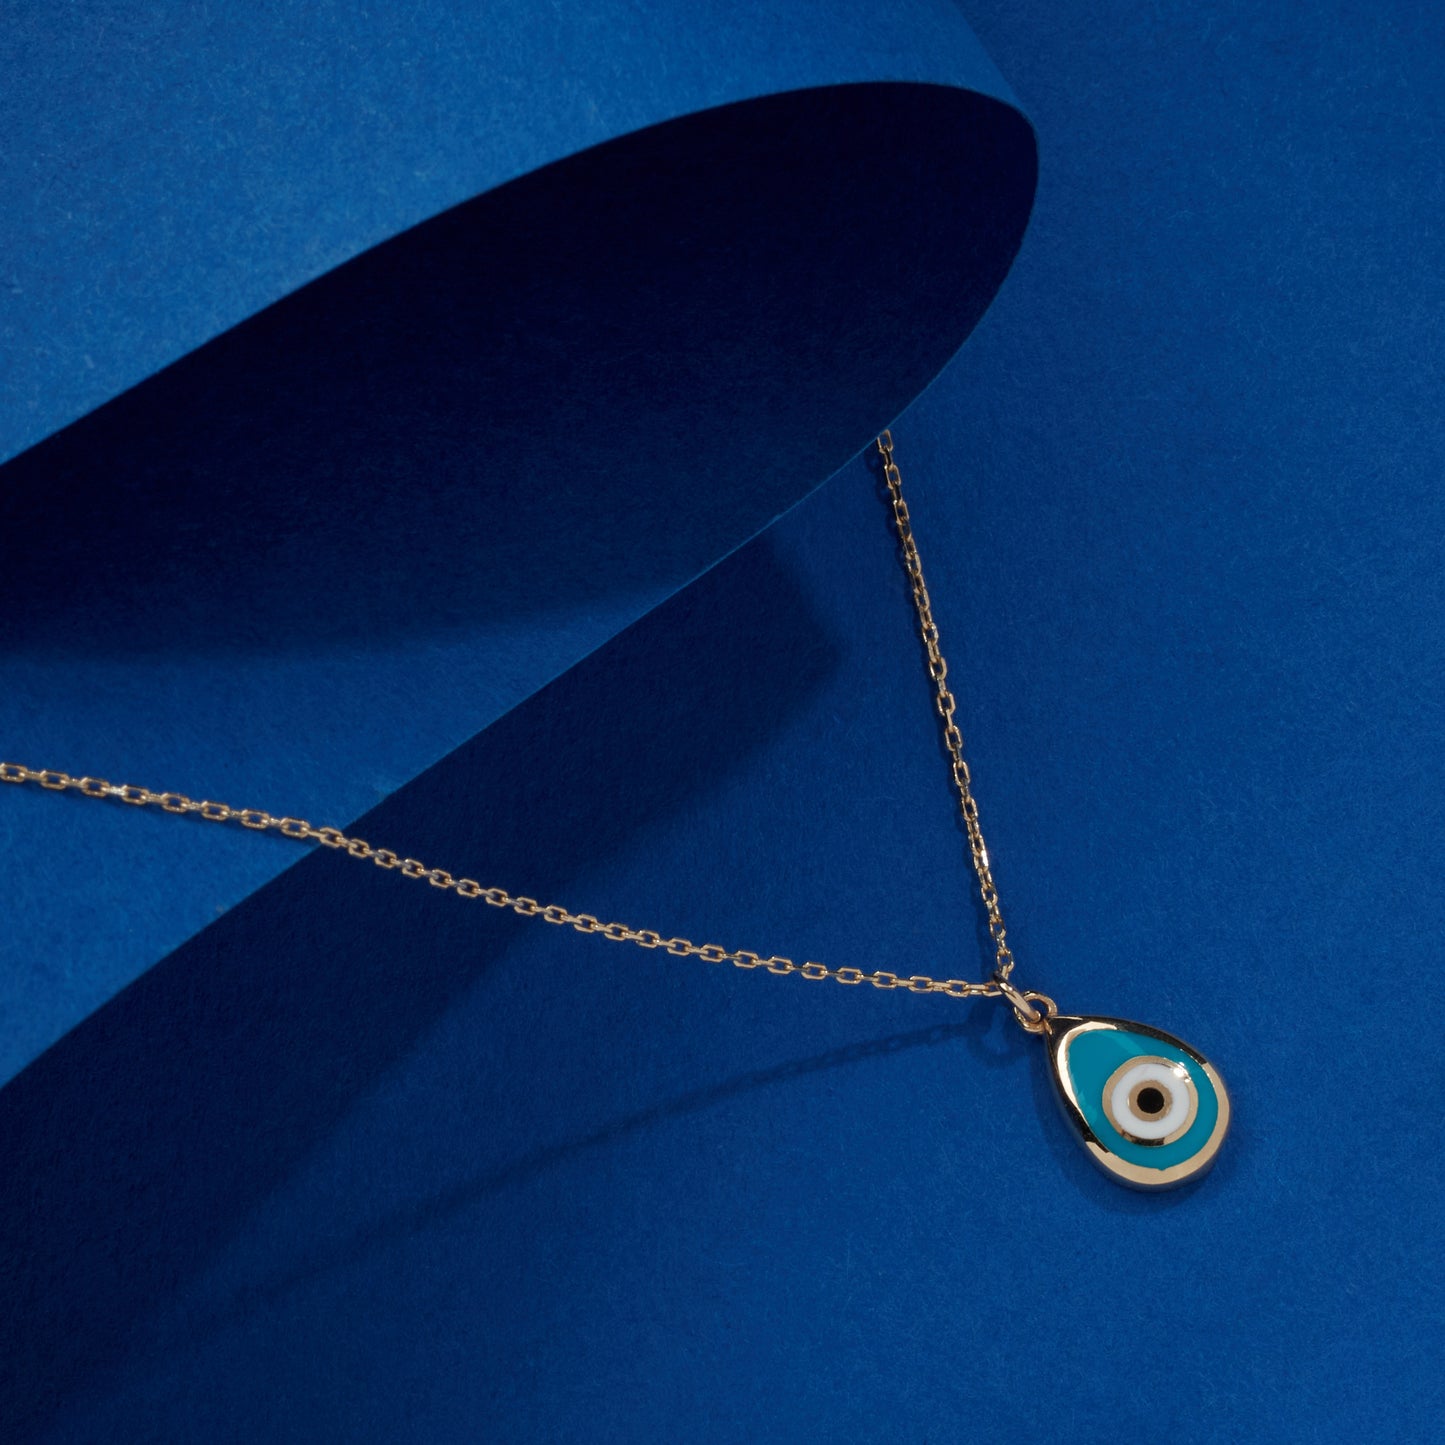 protection necklace, evil eye necklace, evil eye jewelry, solid gold pendant, solid gold necklace, 14k gold necklace, solid gold evil eye, turquoise evil eye, teardrop evil eye, evil eye pendant, gold drop evil eye, gold necklace womens, kabbalah necklace, 